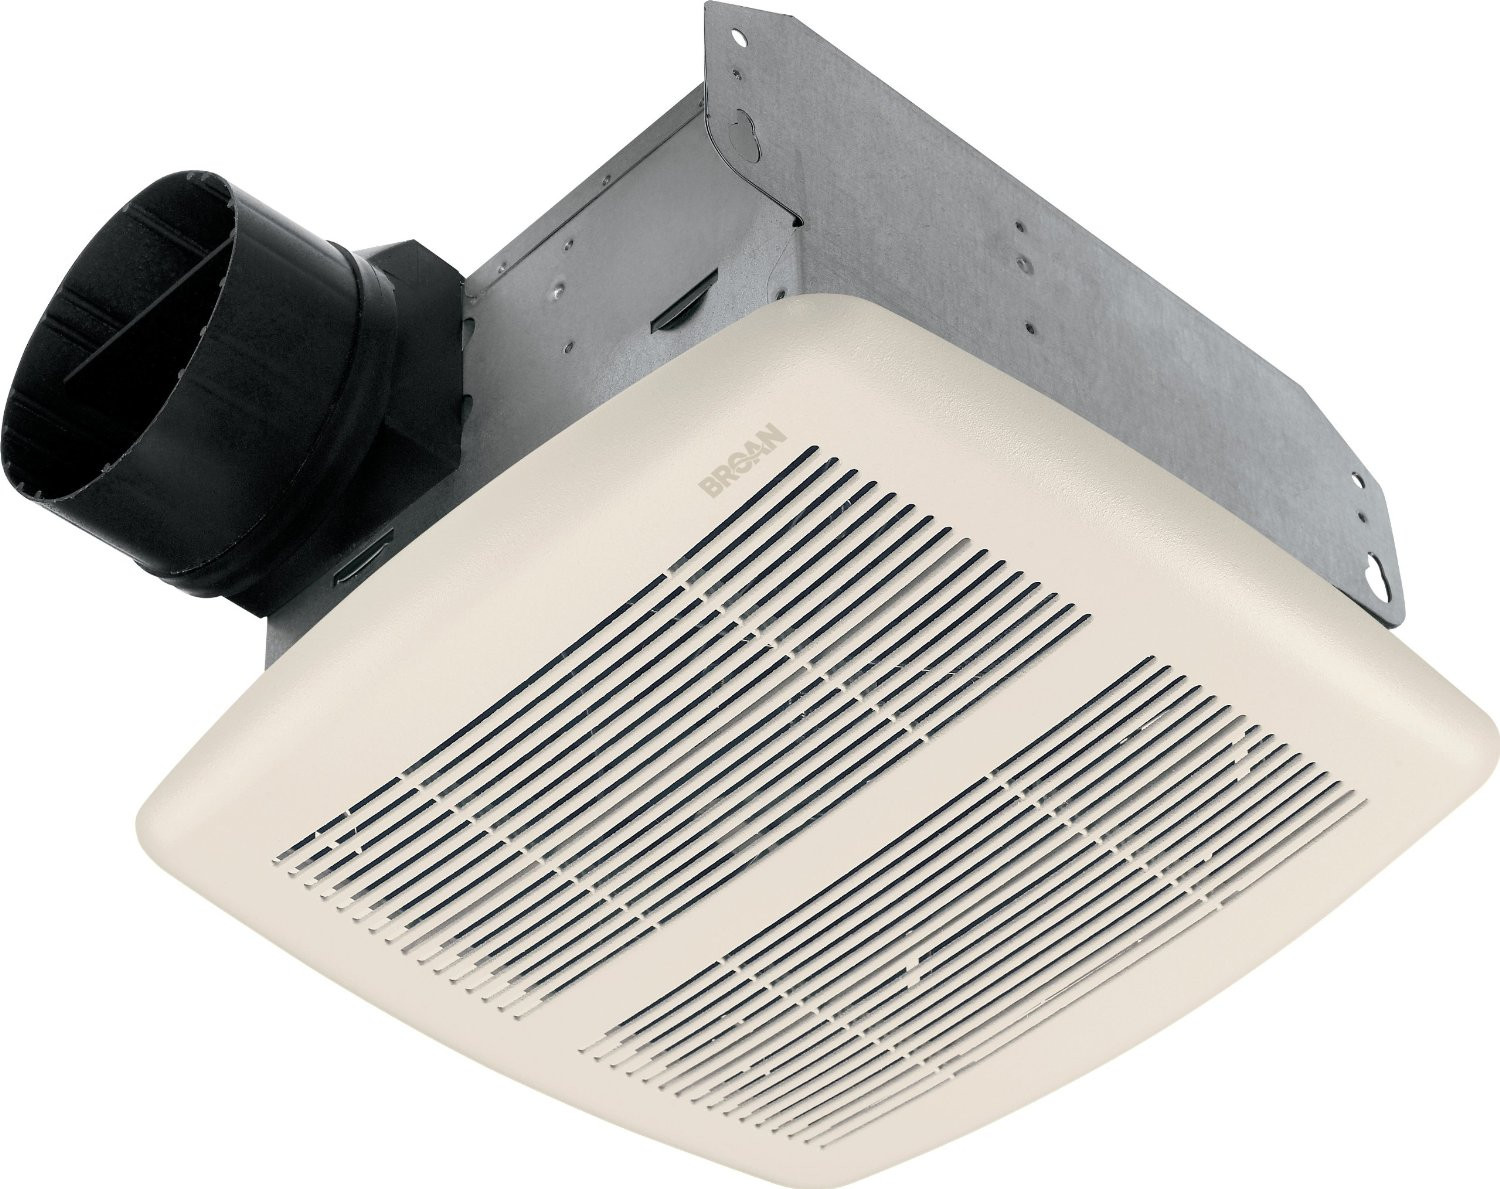 Top Rated Bathroom Exhaust Fans
 Best Bathroom Exhaust Fan Reviews 2017 Rated & Reviewed